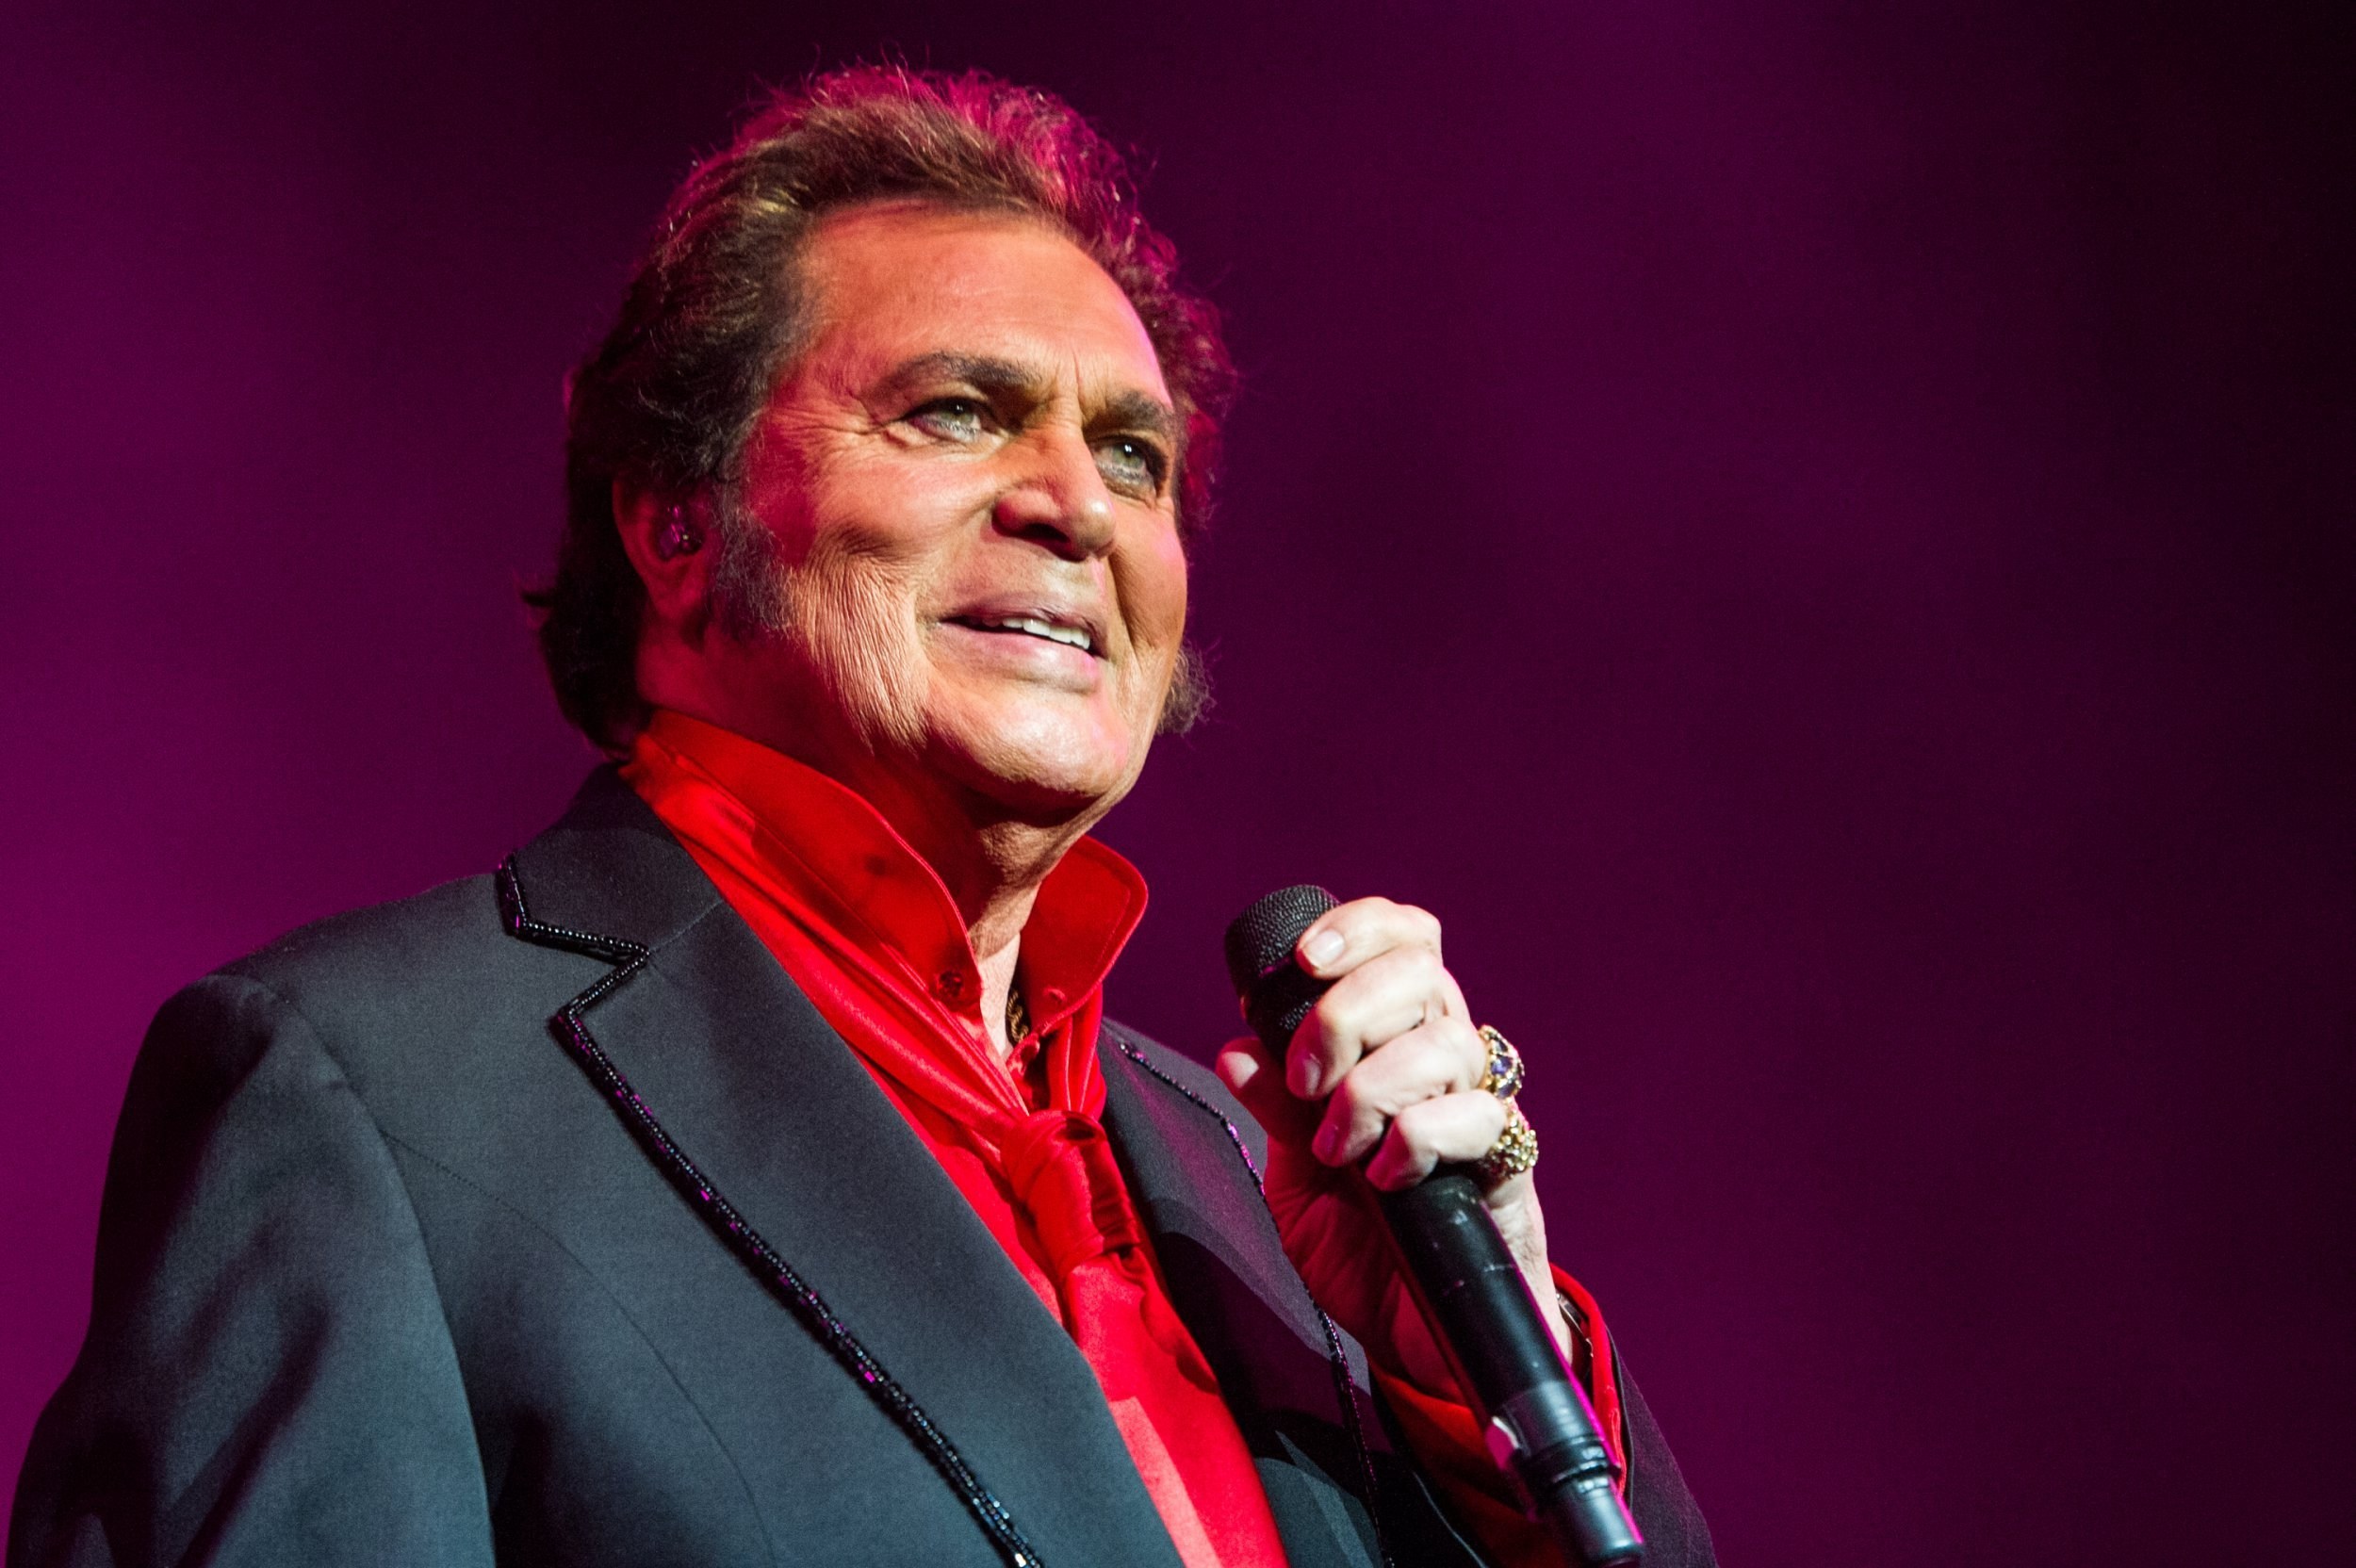 Engelbert Humperdinck tests positive for coronavirus: ‘We are asking for prayers to be sent our way’